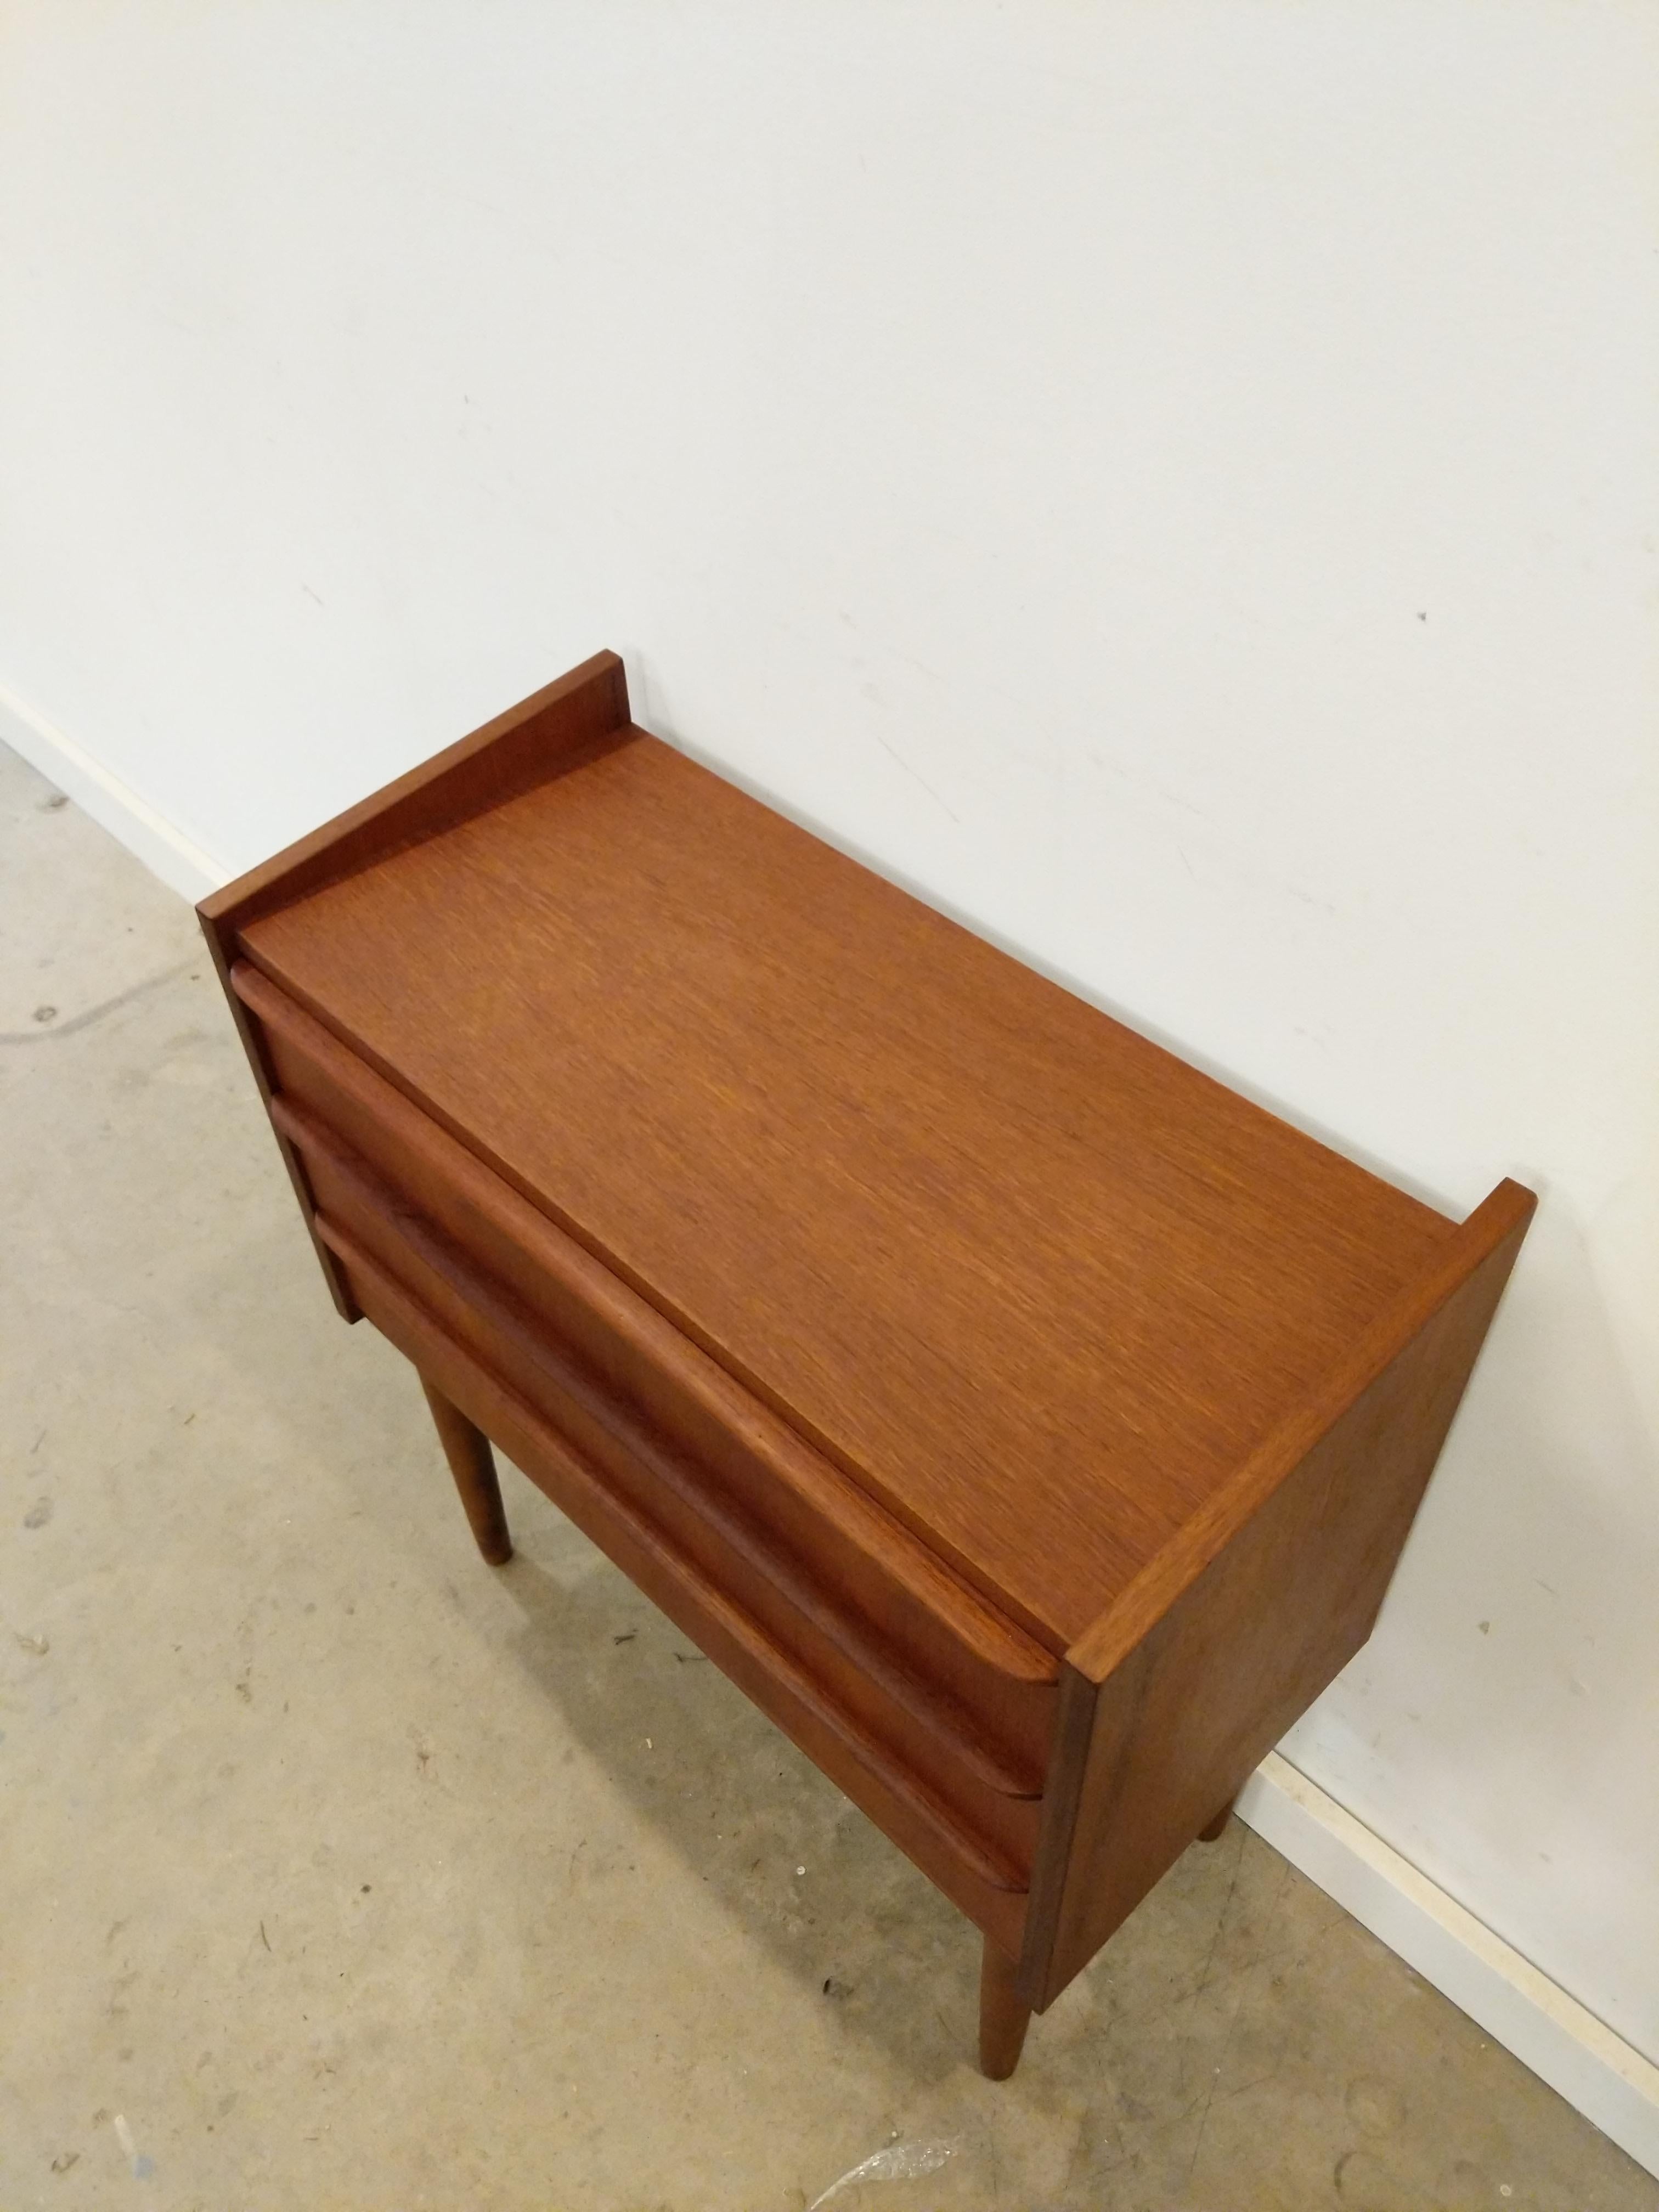 Vintage Danish Modern Teak Nightstand / Low Chest In Good Condition For Sale In Gardiner, NY